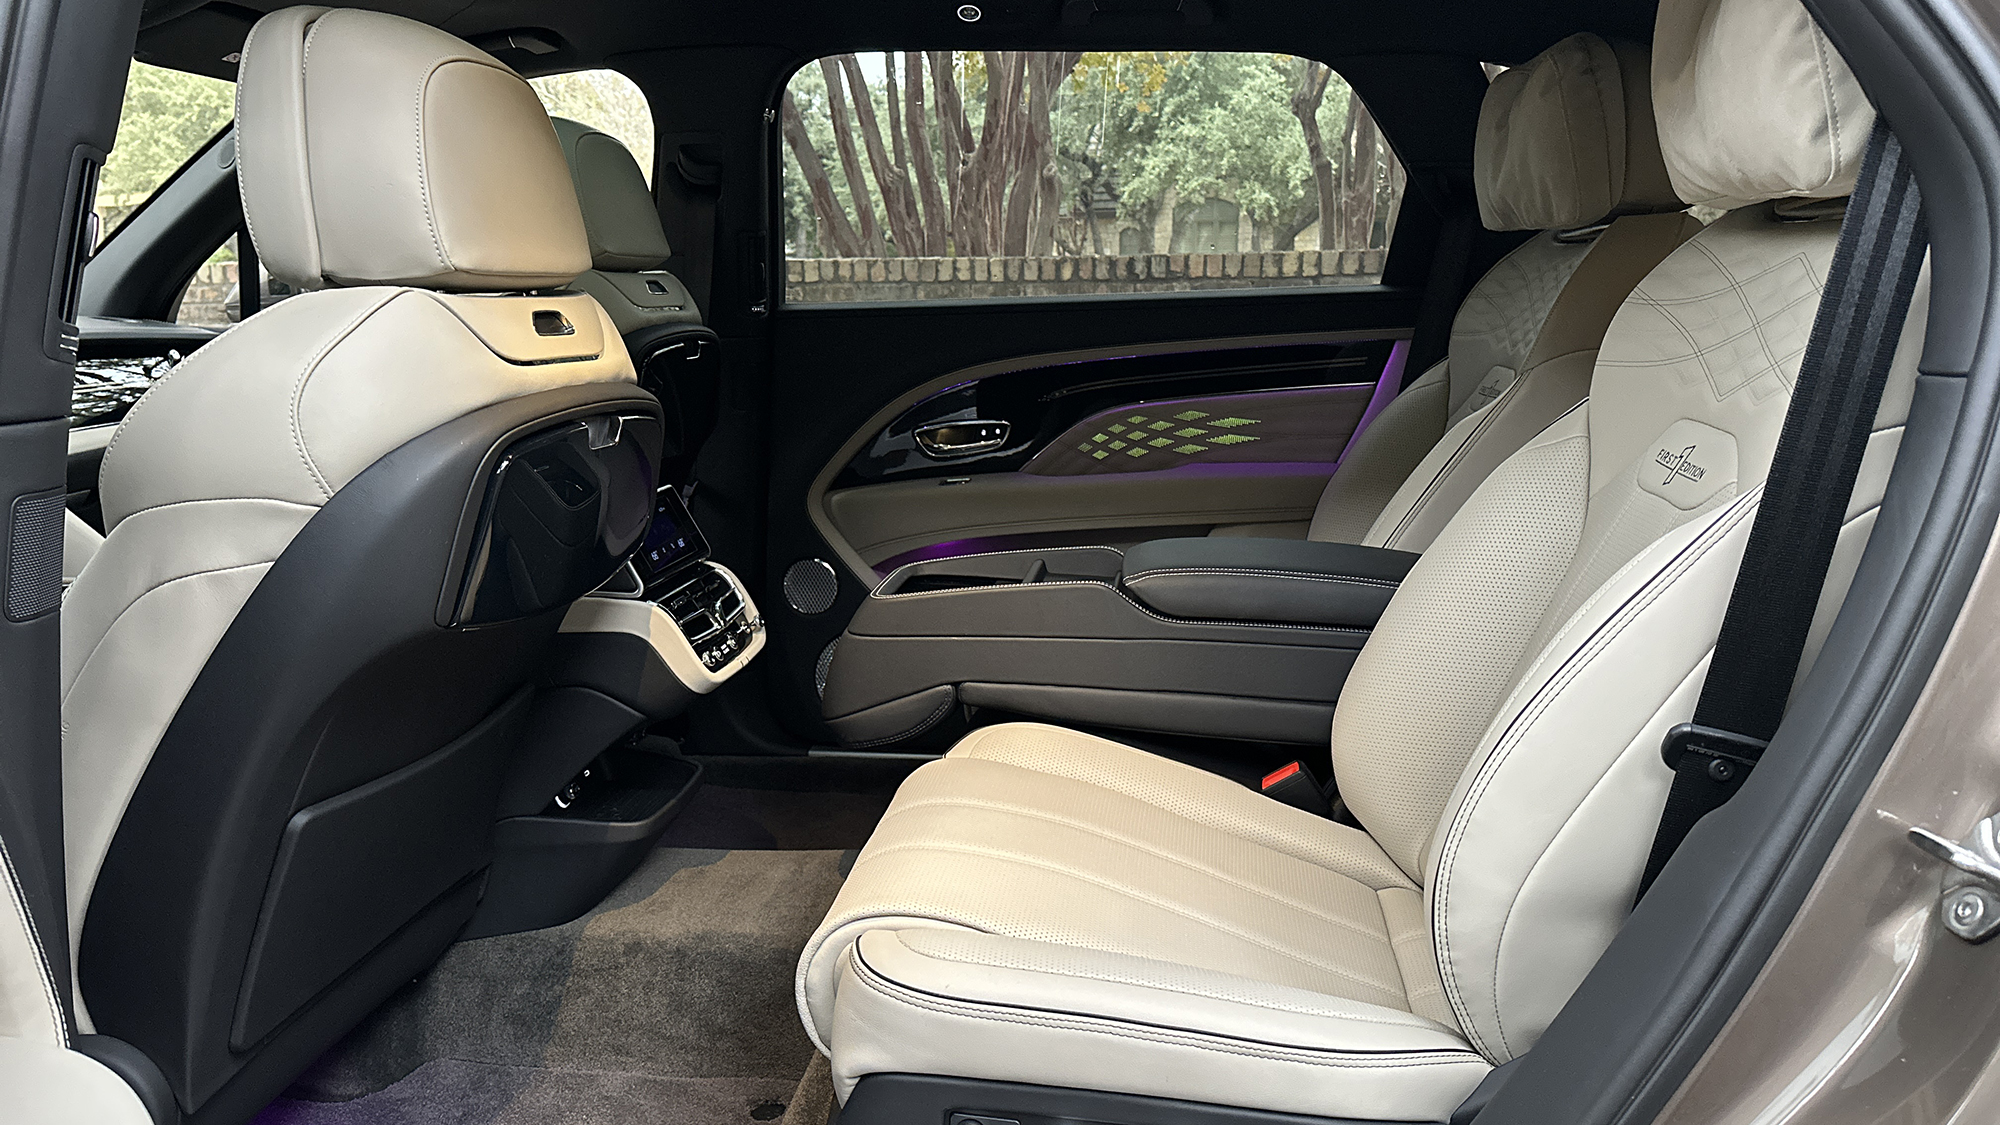 Bentley’s deluxe seats know you’re about to sweat before you do